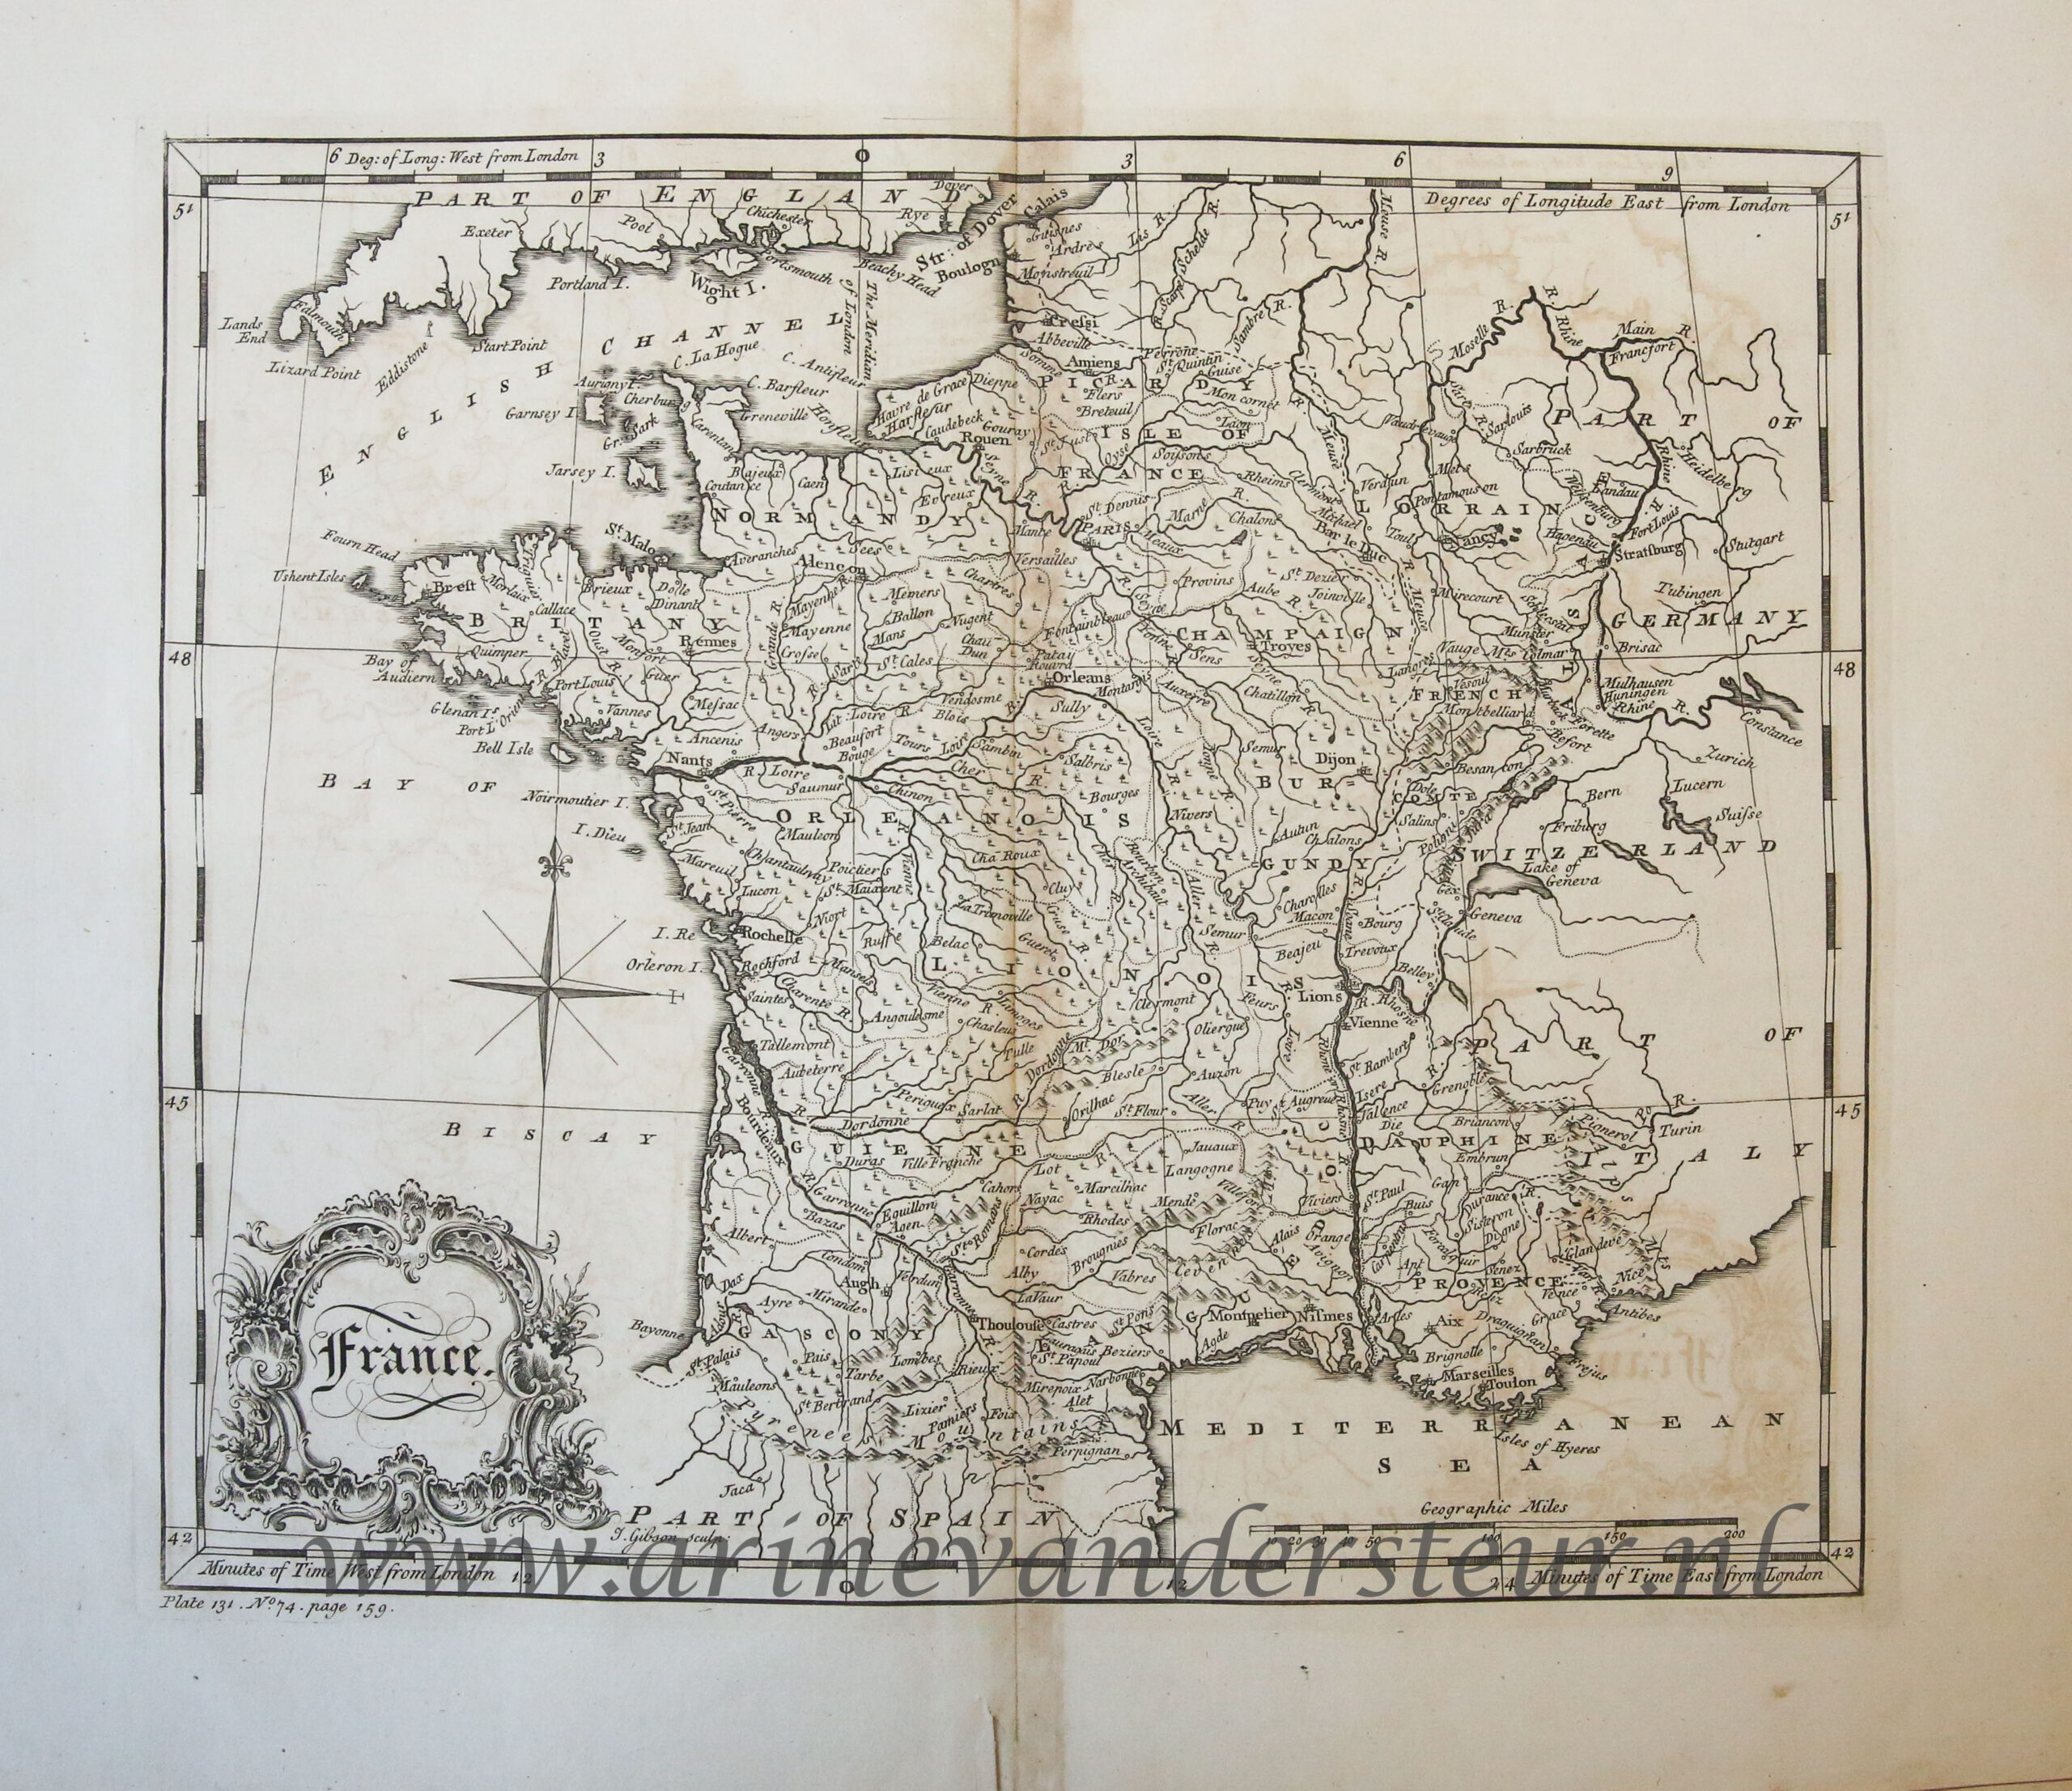 [Antique print, etching and engraving] Map of France, published ca. 1750.